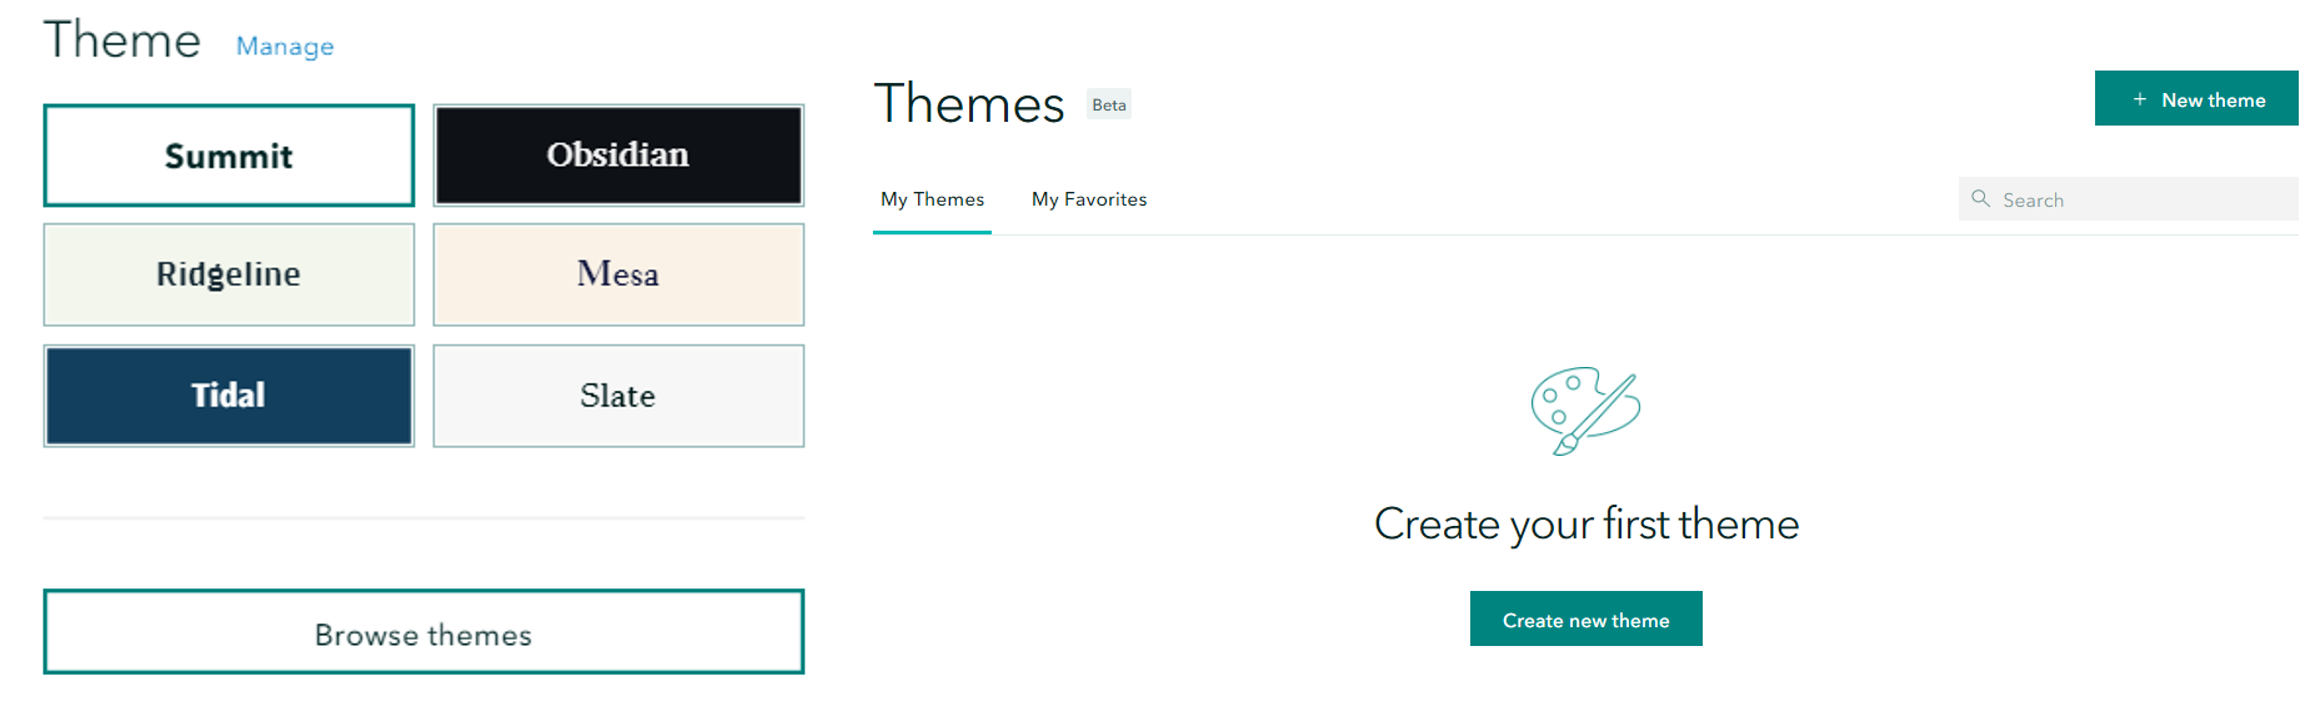 The new theme builder is available in the Design panel